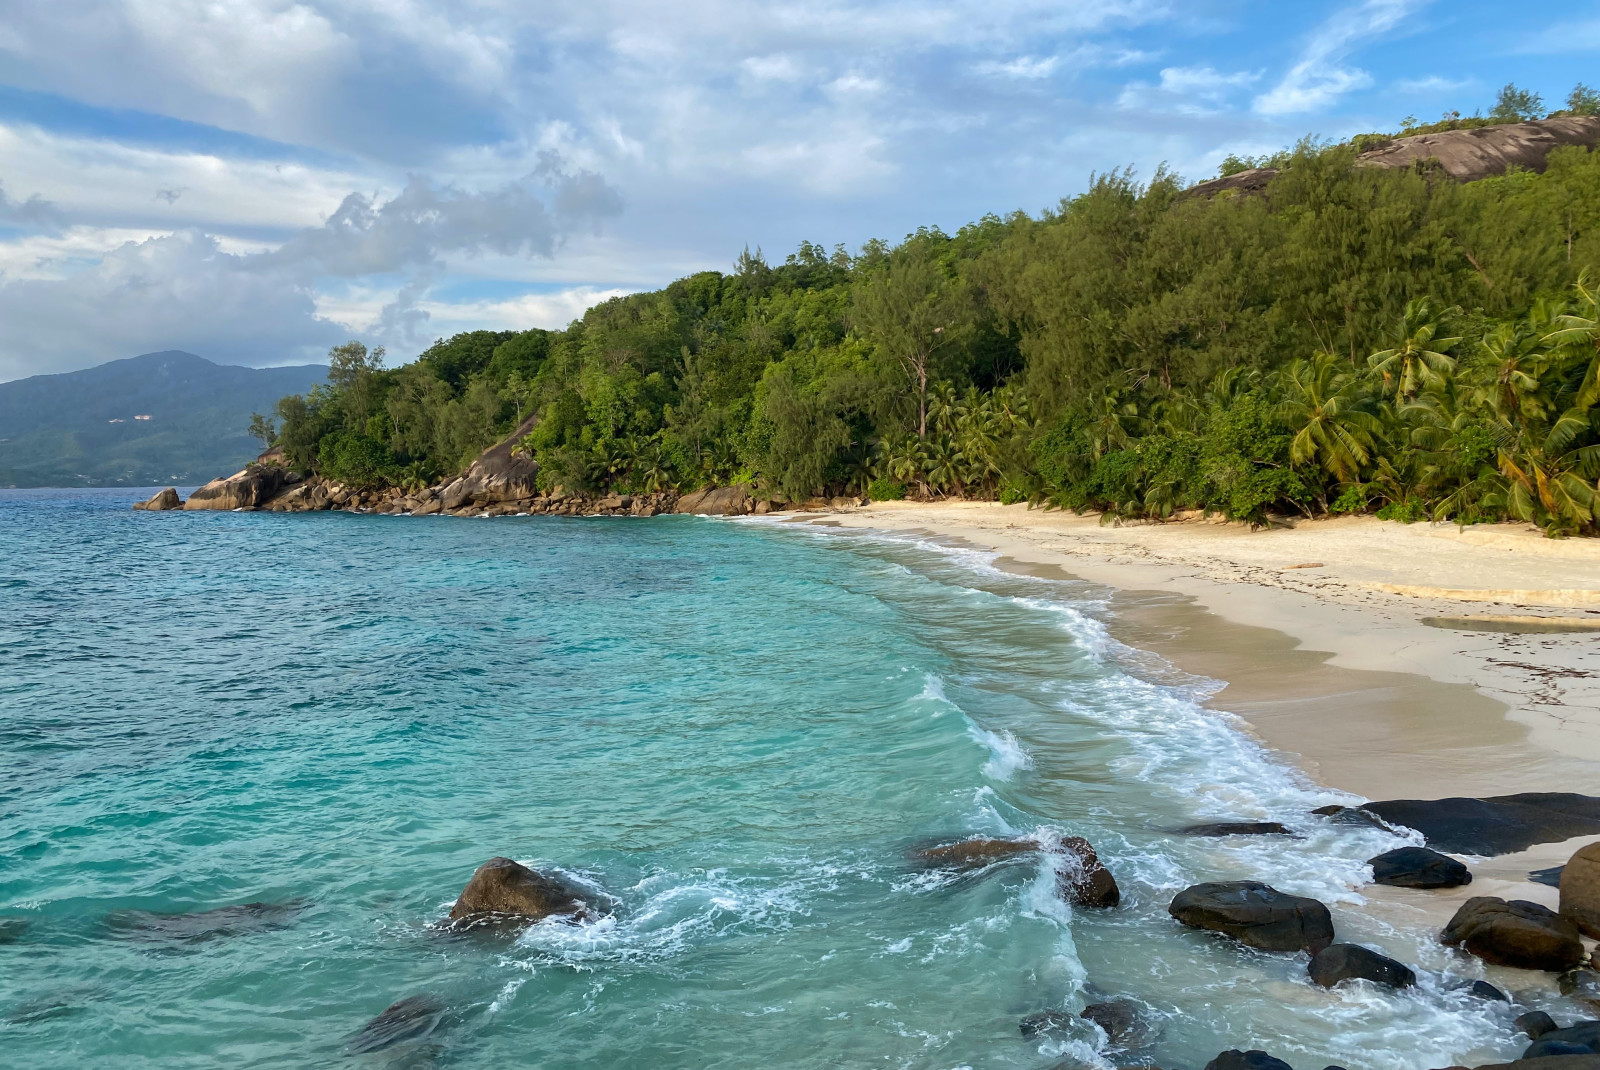 Crystal blue water with surfing waves crashing on tan sand and green lush forest in the Seychelles.